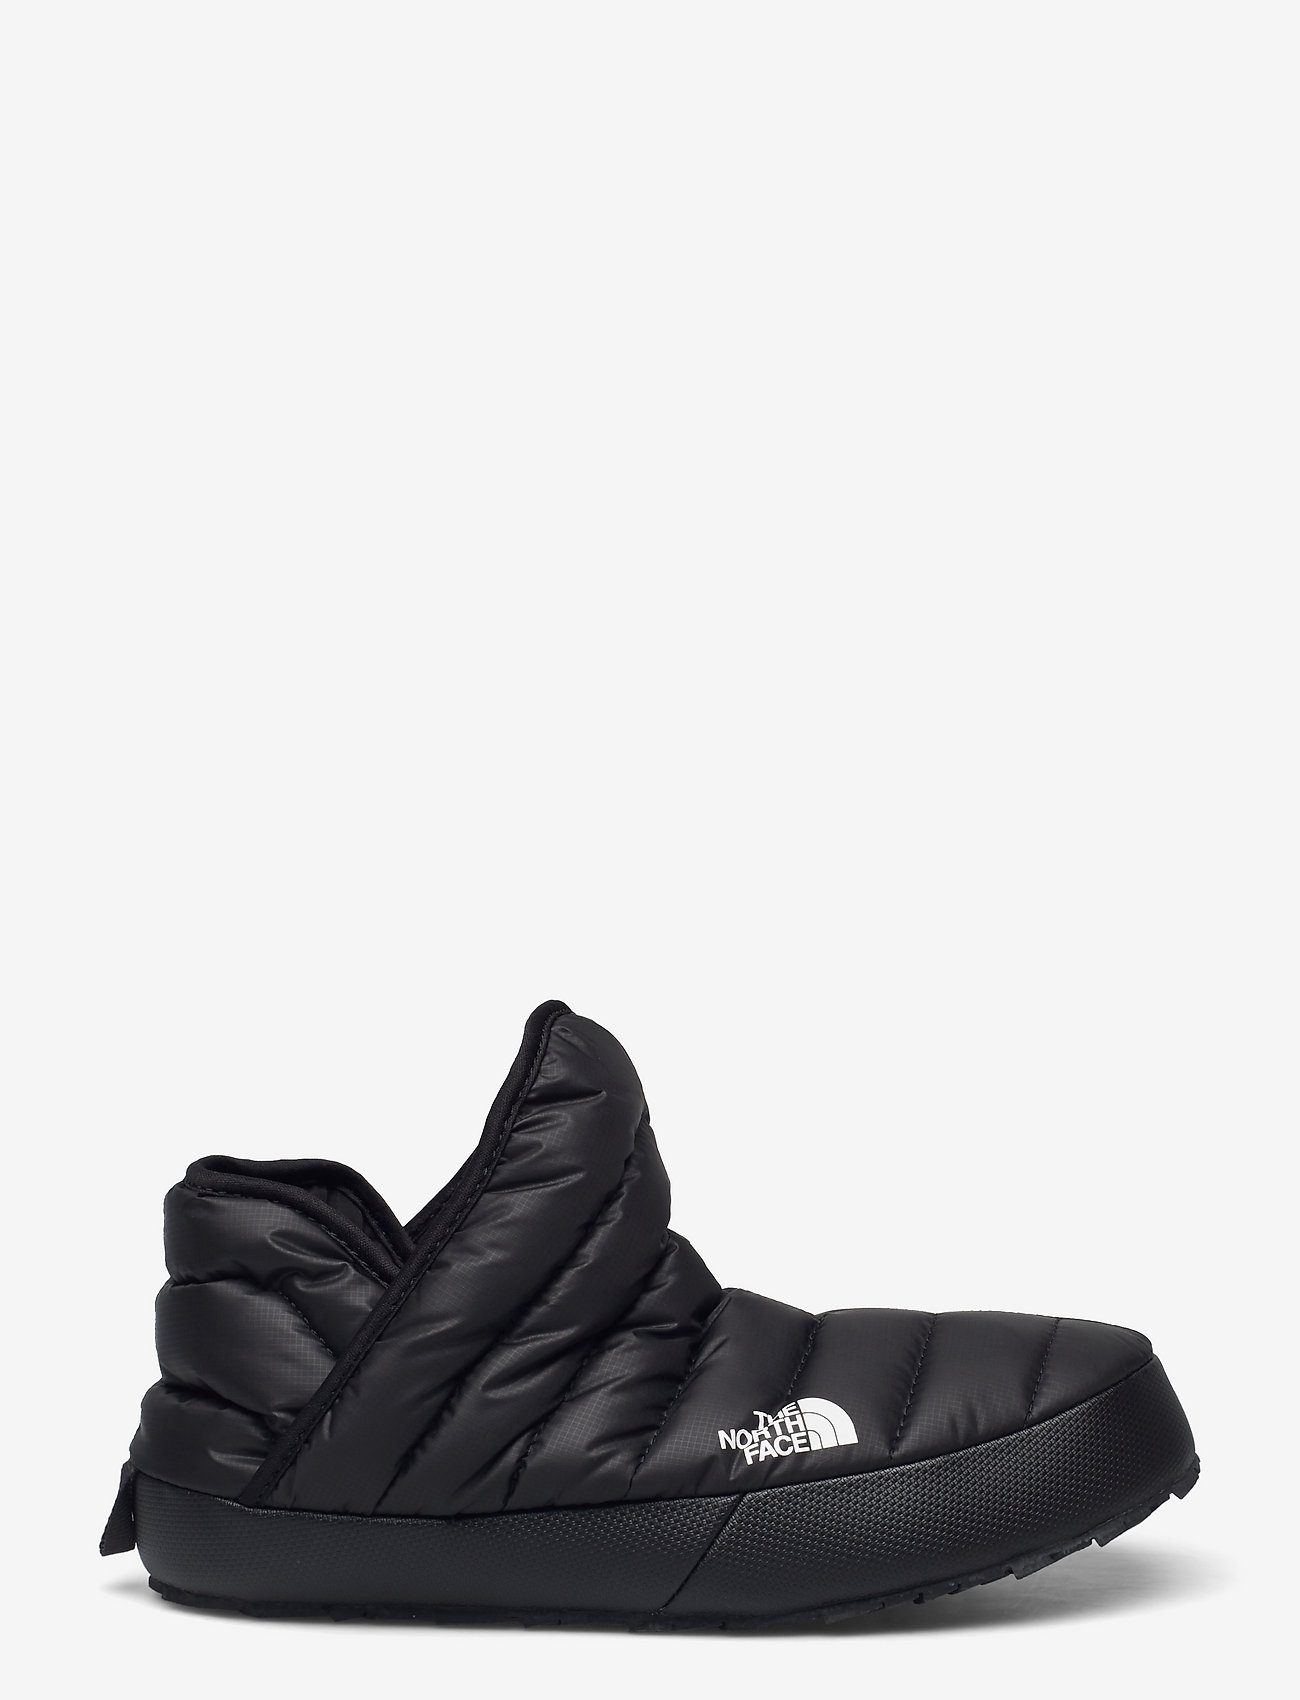 The North Face - W THERMOBALL TRACTION BOOTIE - low top sneakers - tnf black/tnf white - 1